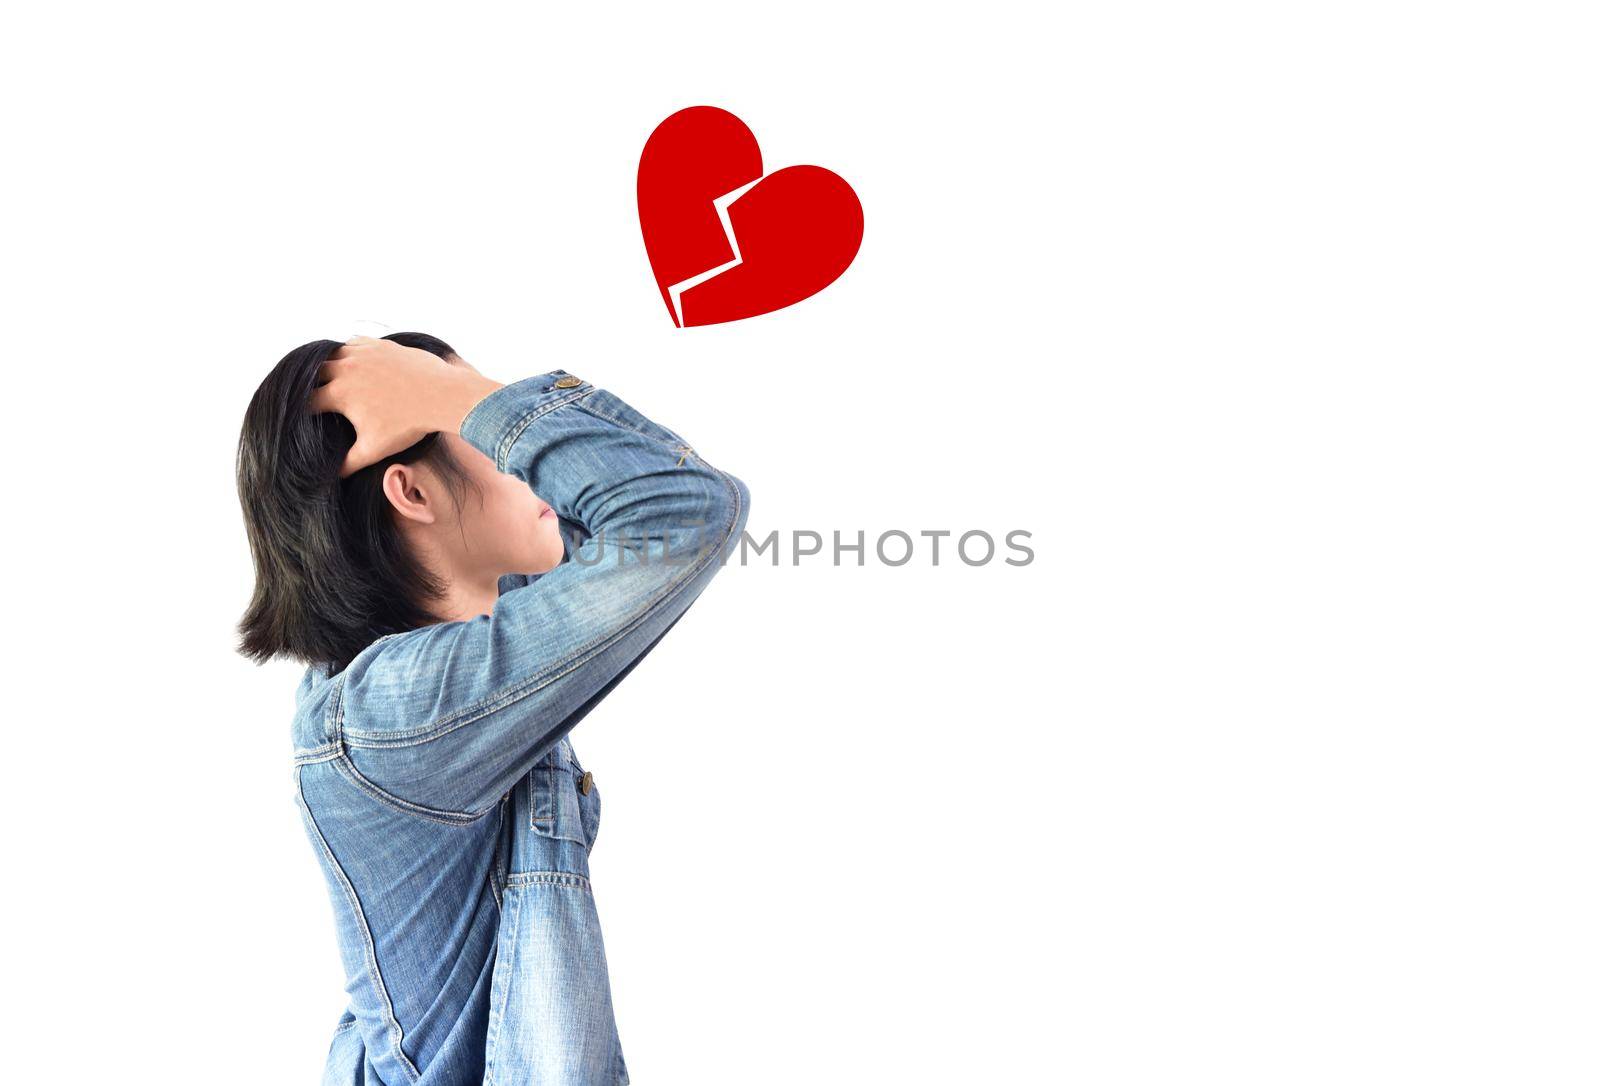 The person who loses the heart, holds the head with both hands and worry to love or not love, isolated white background, Heart broken concept, indeterminable by MiniStocker